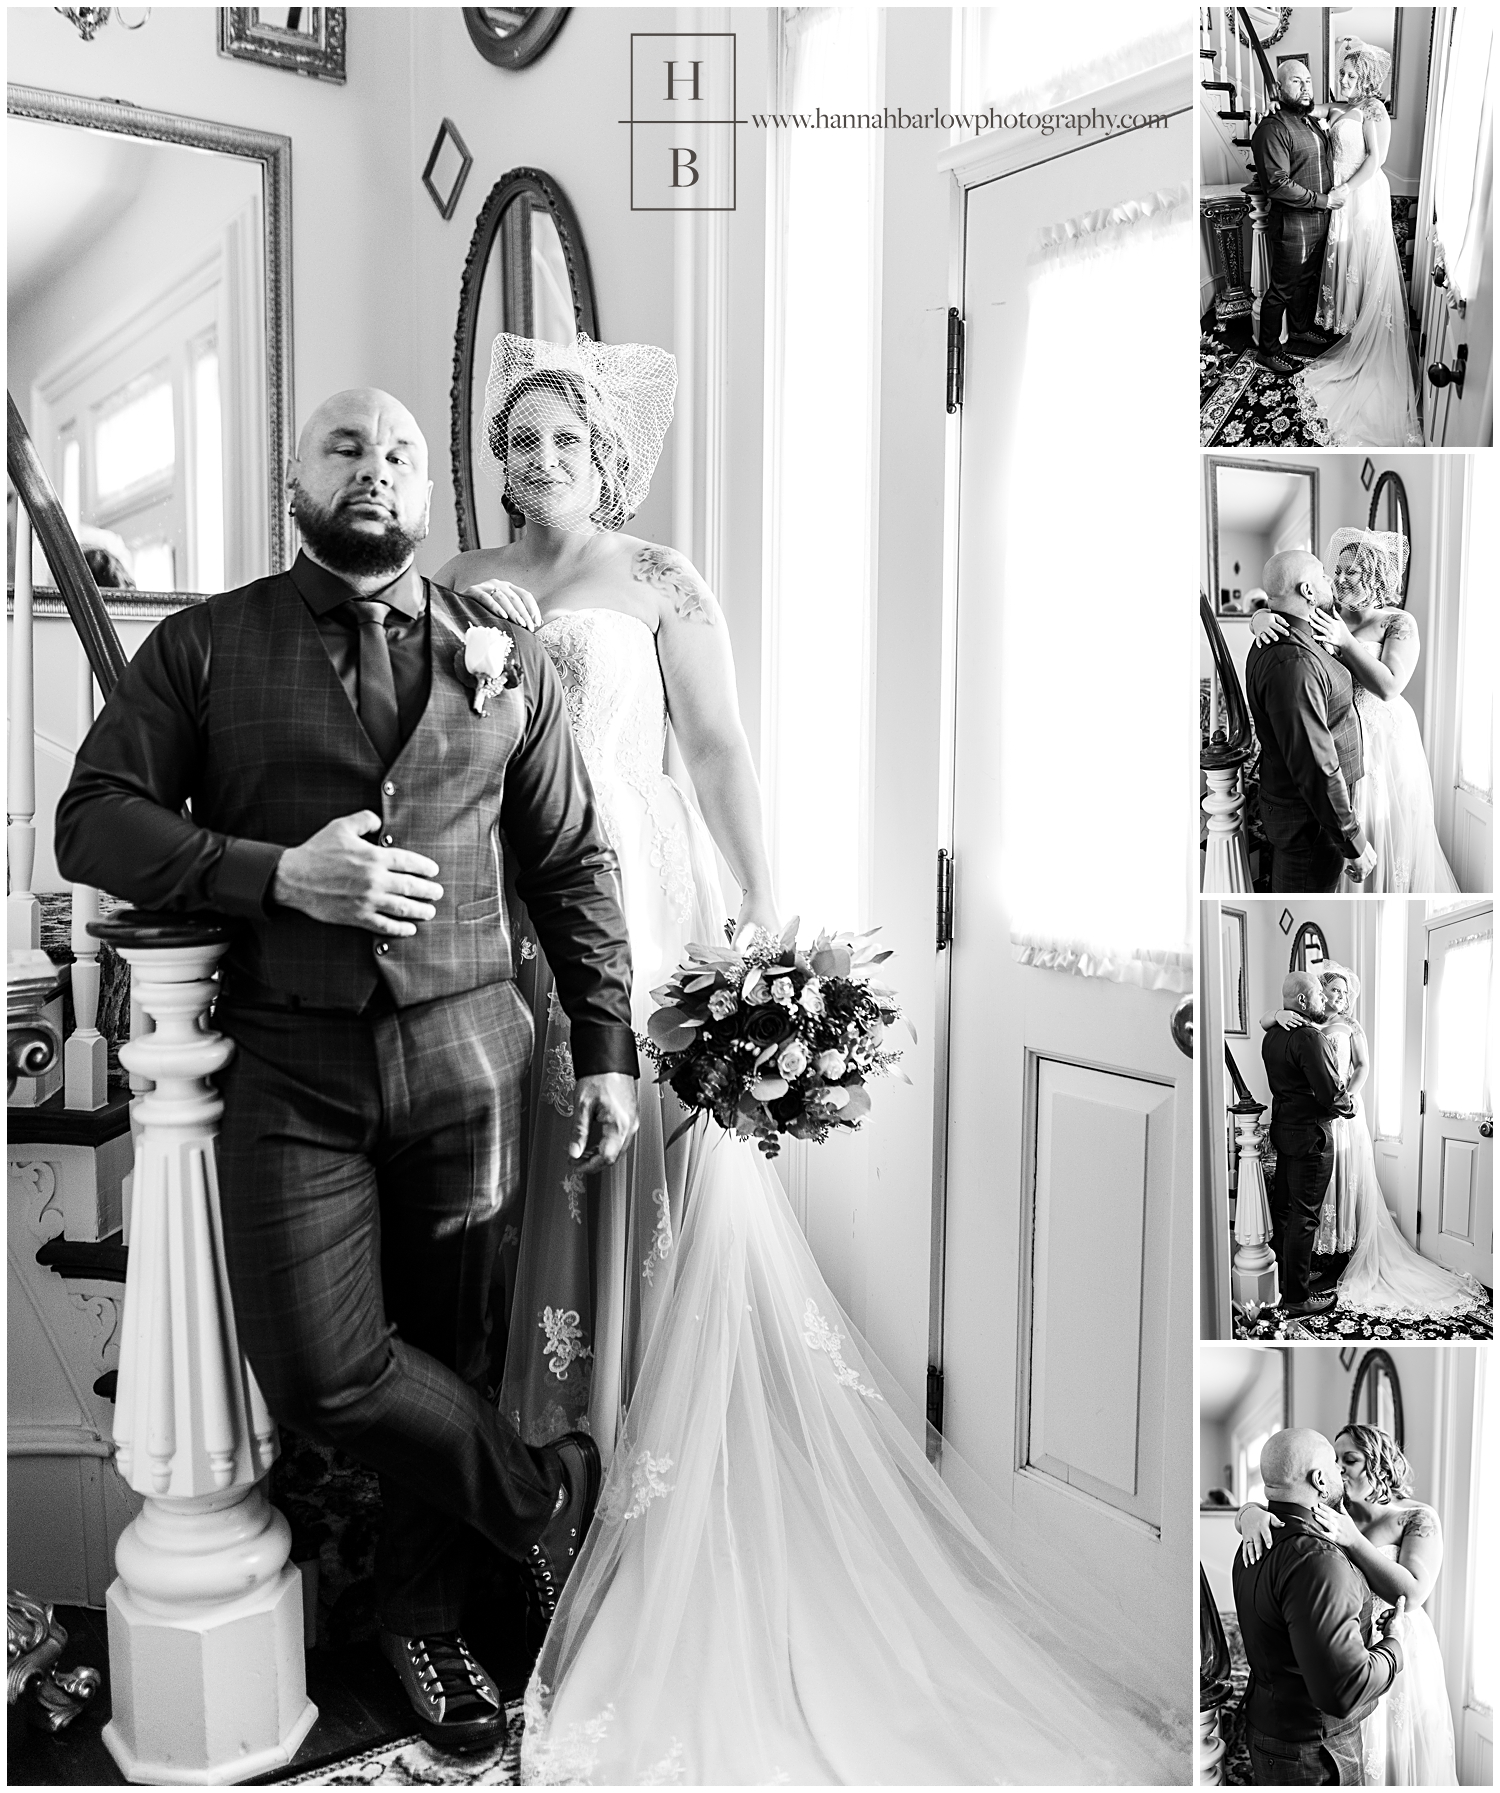 Groom leans on banister by stairs with bride for wedding photos in black and white